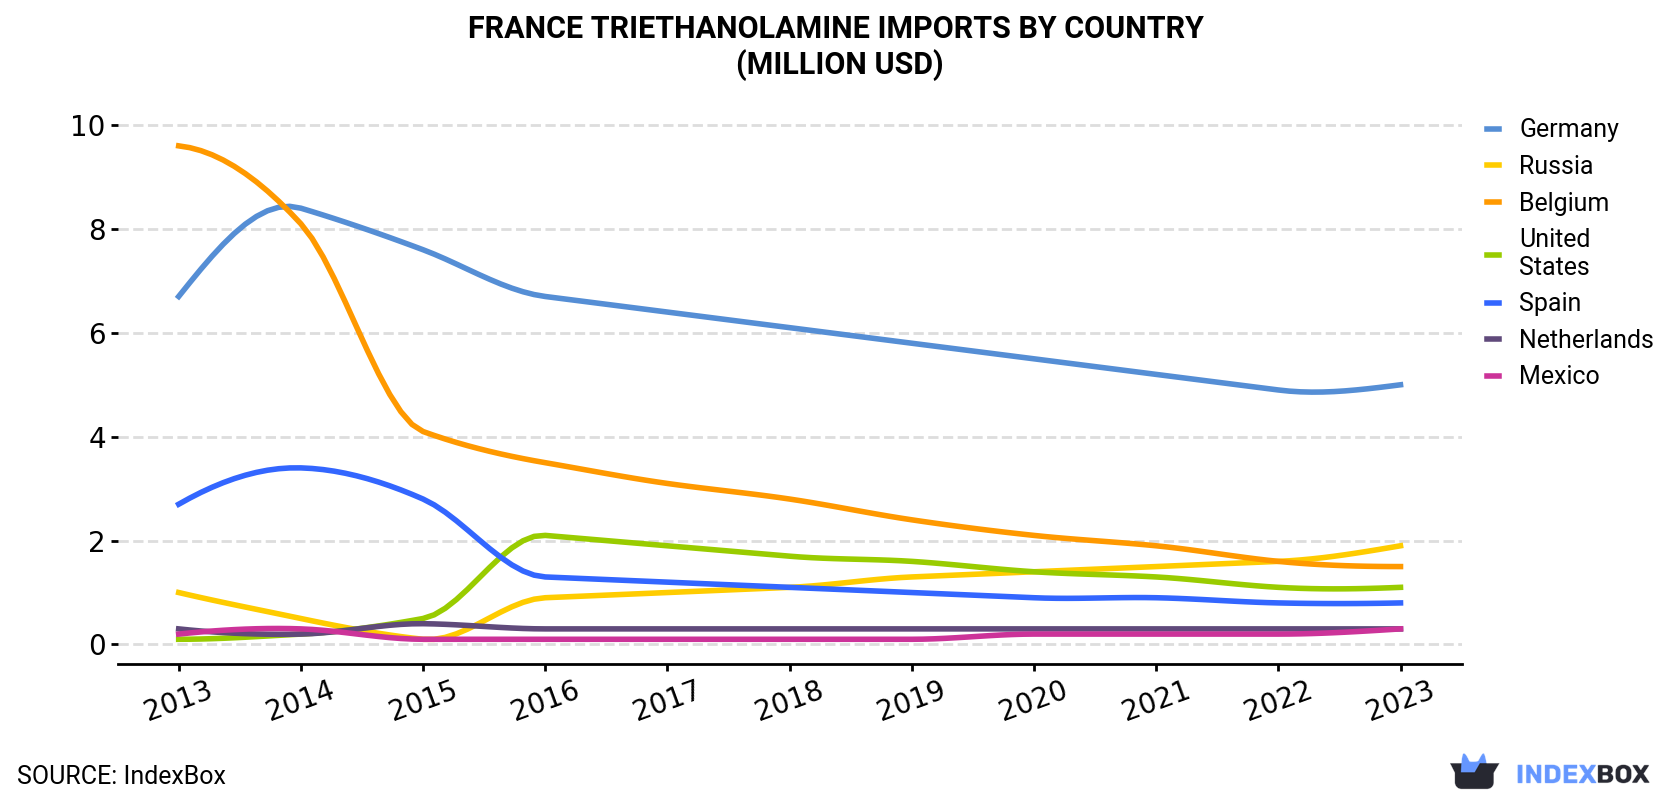 France Triethanolamine Imports By Country (Million USD)